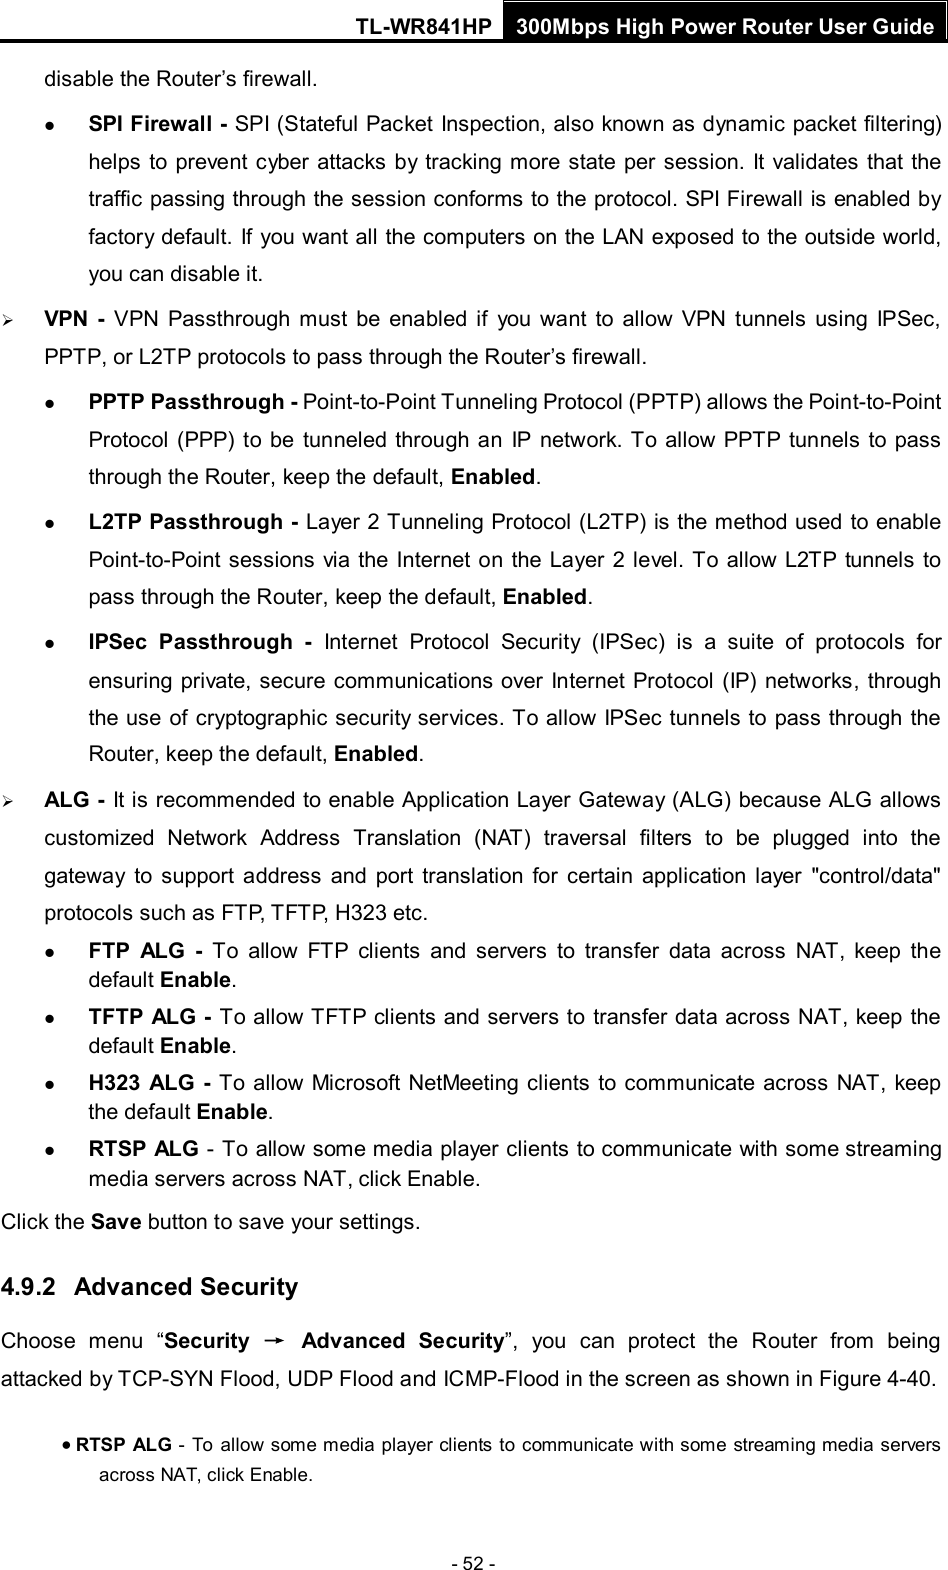 TL-WR841HP 300Mbps High Power Router User Guide  - 52 - disable the Router’s firewall.  SPI Firewall - SPI (Stateful Packet Inspection, also known as dynamic packet filtering) helps to prevent cyber attacks by tracking more state per session. It validates that the traffic passing through the session conforms to the protocol. SPI Firewall is enabled by factory default. If you want all the computers on the LAN exposed to the outside world, you can disable it.    VPN  -  VPN  Passthrough must be enabled if you want to allow VPN tunnels using IPSec, PPTP, or L2TP protocols to pass through the Router’s firewall.  PPTP Passthrough - Point-to-Point Tunneling Protocol (PPTP) allows the Point-to-Point Protocol (PPP) to be tunneled through an IP network. To allow PPTP tunnels to pass through the Router, keep the default, Enabled.    L2TP Passthrough - Layer 2 Tunneling Protocol (L2TP) is the method used to enable Point-to-Point sessions via the Internet on the Layer 2 level. To allow L2TP tunnels to pass through the Router, keep the default, Enabled.  IPSec Passthrough - Internet Protocol Security (IPSec) is a suite of protocols for ensuring private, secure communications over Internet Protocol (IP) networks, through the use of cryptographic security services. To allow IPSec tunnels to pass through the Router, keep the default, Enabled.  ALG - It is recommended to enable Application Layer Gateway (ALG) because ALG allows customized Network Address Translation (NAT) traversal filters to be plugged into the gateway to support address and port translation for certain application layer &quot;control/data&quot; protocols such as FTP, TFTP, H323 etc.    FTP ALG - To allow FTP clients and servers to transfer data across NAT,  keep the default Enable.    TFTP ALG - To allow TFTP clients and servers to transfer data across NAT, keep the default Enable.  H323 ALG - To allow Microsoft NetMeeting clients to communicate across NAT, keep the default Enable.  RTSP ALG - To allow some media player clients to communicate with some streaming media servers across NAT, click Enable.   Click the Save button to save your settings. 4.9.2 Advanced Security Choose menu “Security → Advanced Security”,  you can protect the Router from being attacked by TCP-SYN Flood, UDP Flood and ICMP-Flood in the screen as shown in Figure 4-40.   • RTSP ALG - To allow some media player clients to communicate with some streaming media servers across NAT, click Enable.   